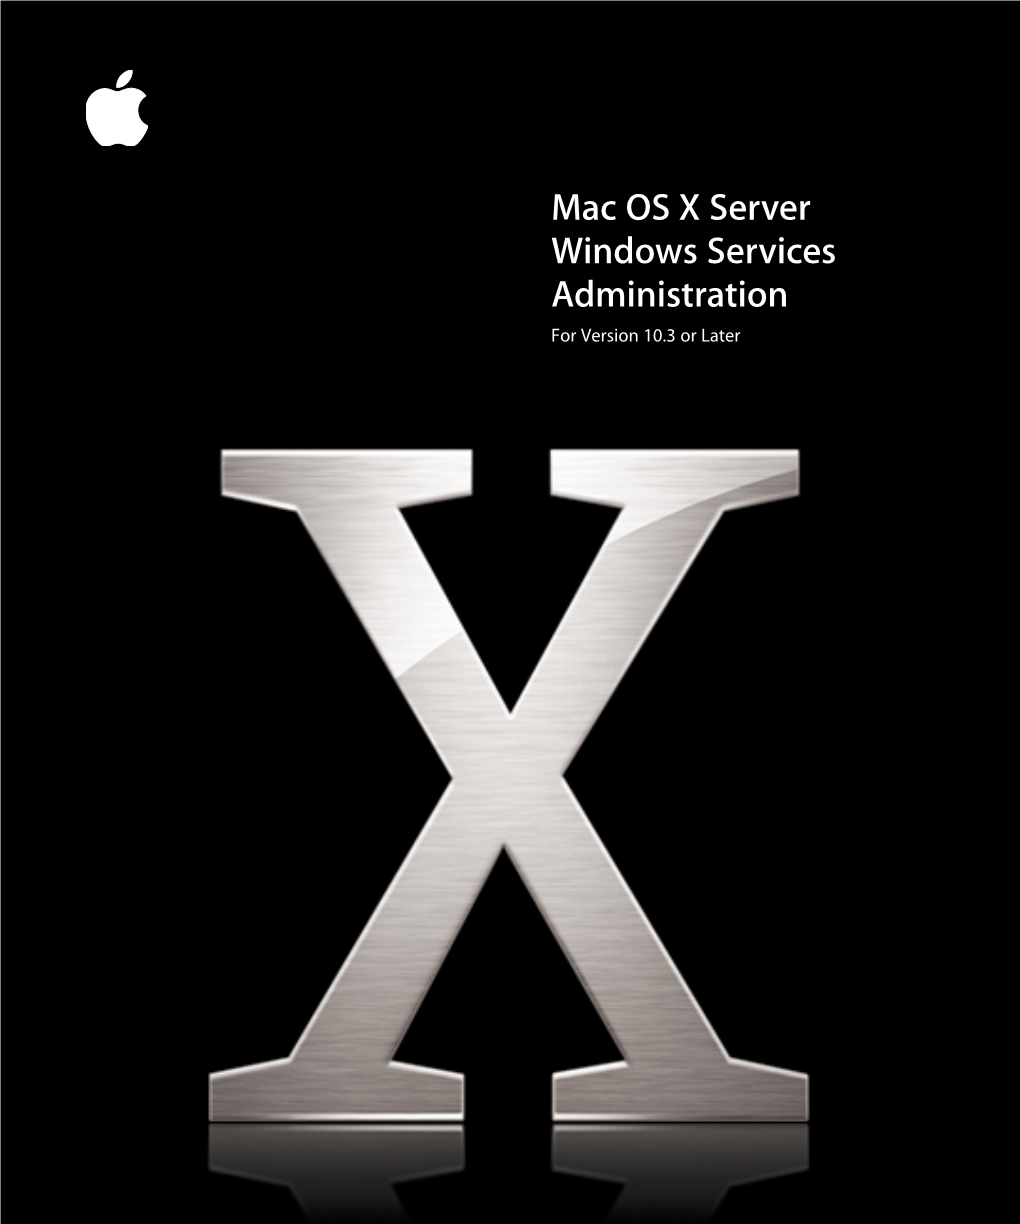 Mac OS X Server Windows Services Administration for Version 10.3 Or Later